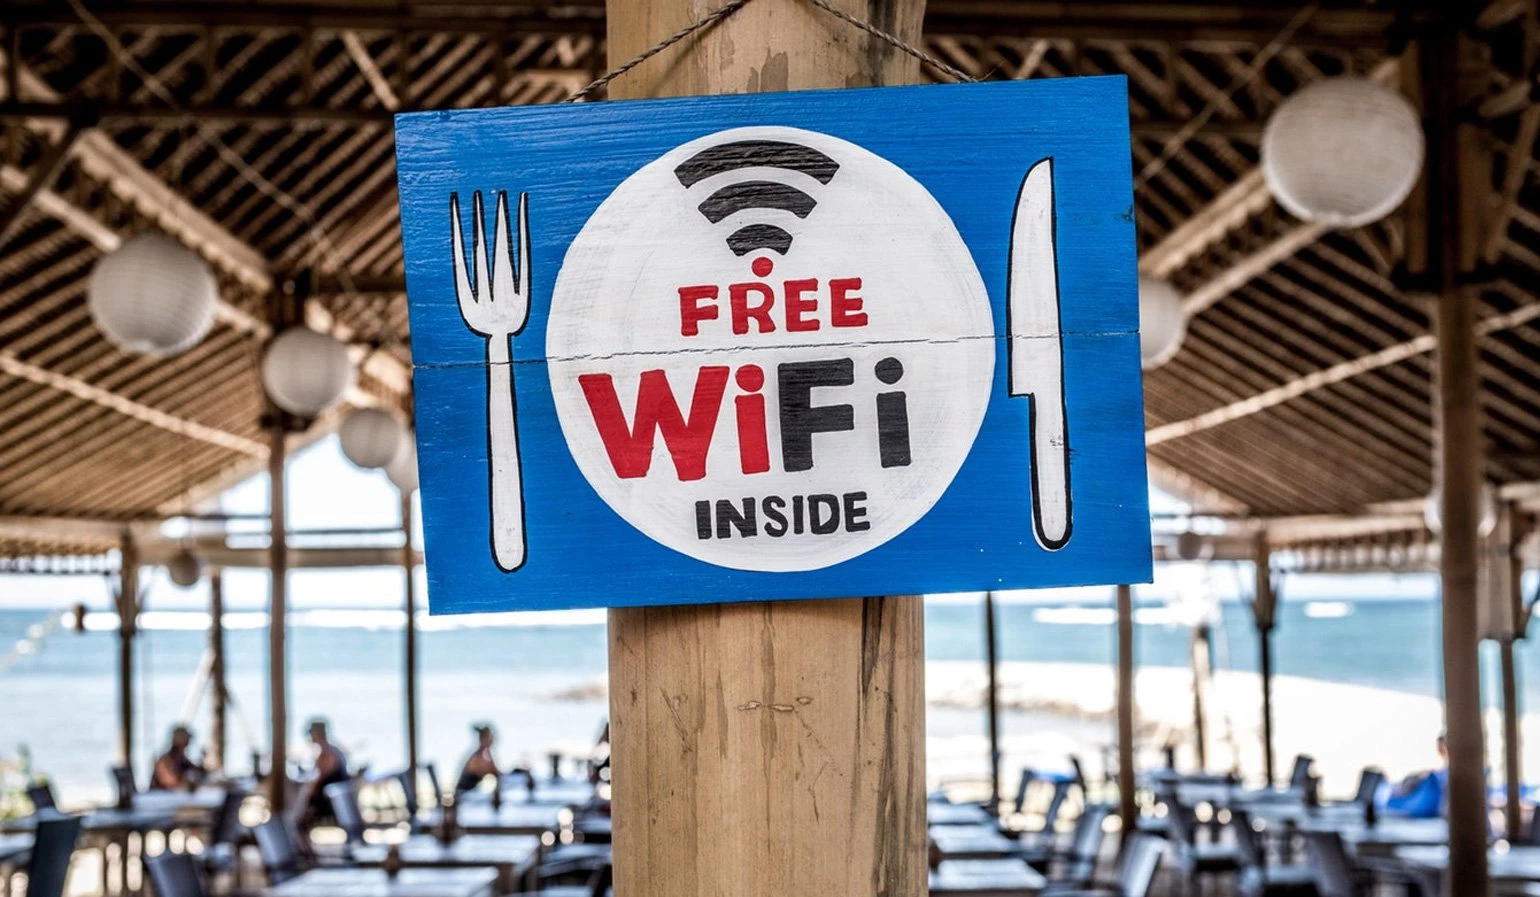 restaurant email list building - Free Wi-Fi in restaurant